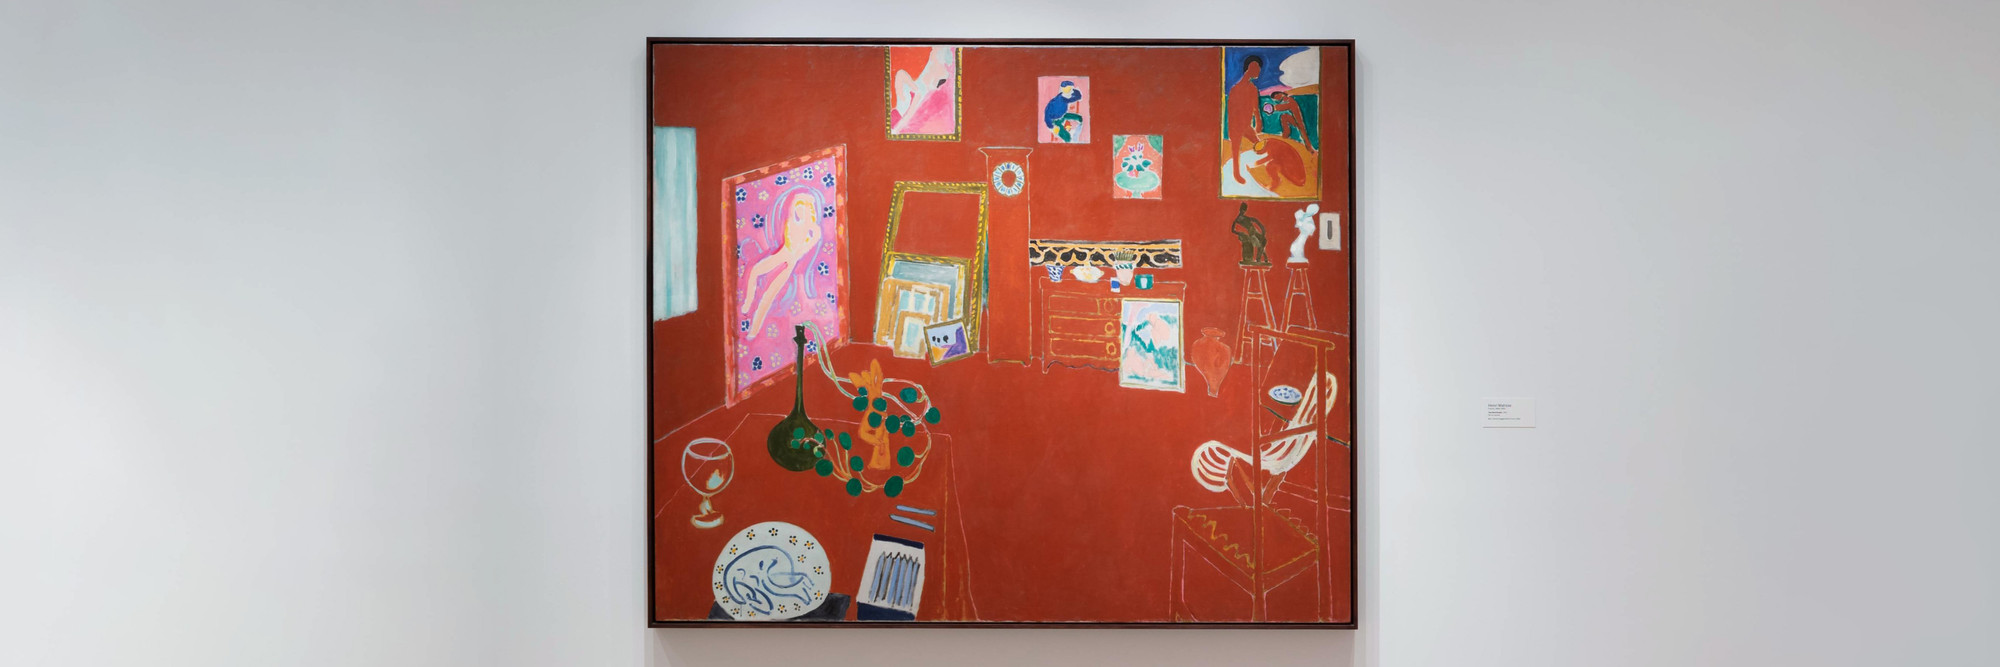 Henri Matisse. The Red Studio. Issy-les-Moulineaux, fall 1911. Oil on canvas, 71 1/4&#34; × 7&#39; 2 1/4&#34; (181 × 219.1 cm). Mrs. Simon Guggenheim Fund. © 2021 Succession H. Matisse/Artists Rights Society (ARS), New York